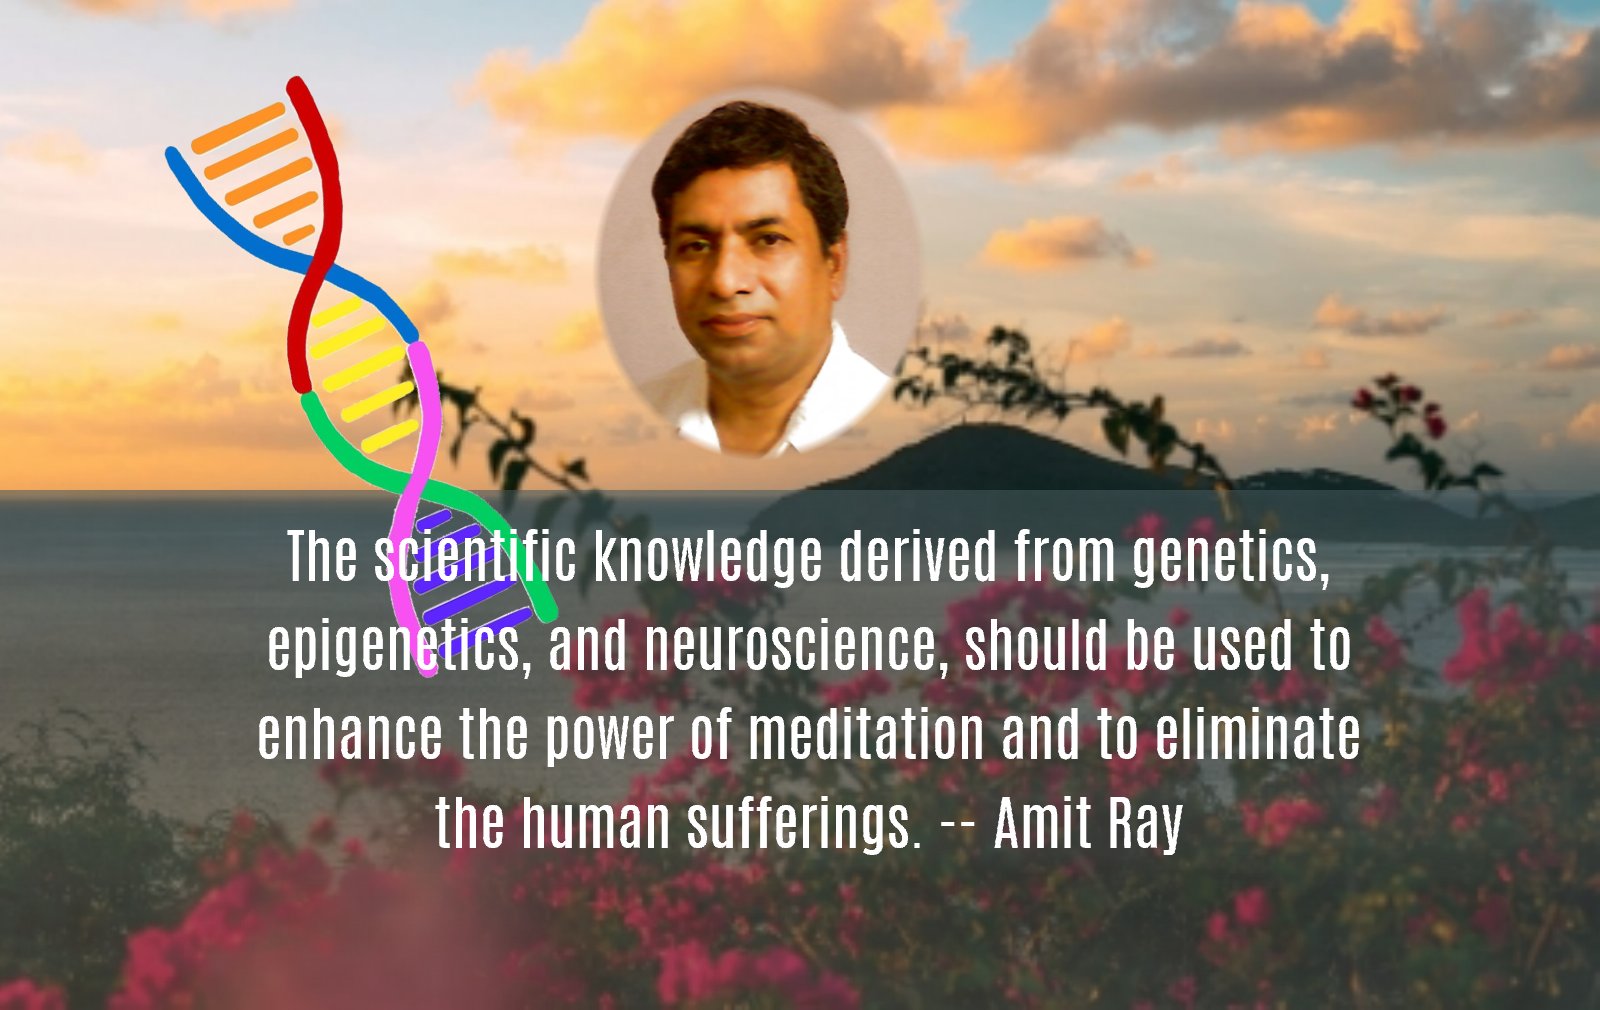 The scientific knowledge derived from genetics, epigenetics, and neuroscience, should be used to enhance the power of meditation and to eliminate the sufferings of humanity. - Amit Ray